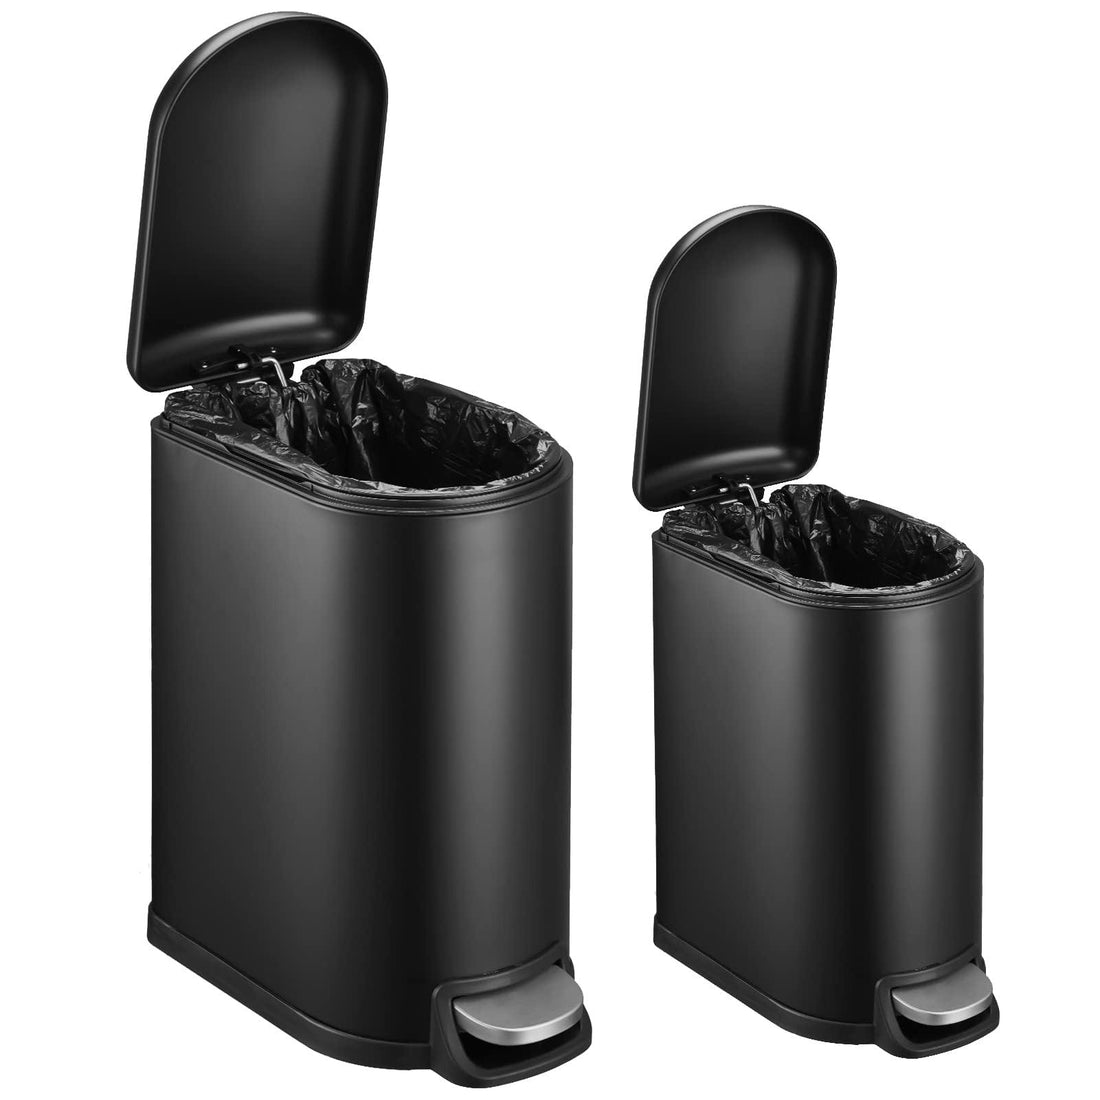 10.6 & 2.6 Gallon Trash Can Combo Set of 2 Small Bathroom Trash Can Stainless Steel Black